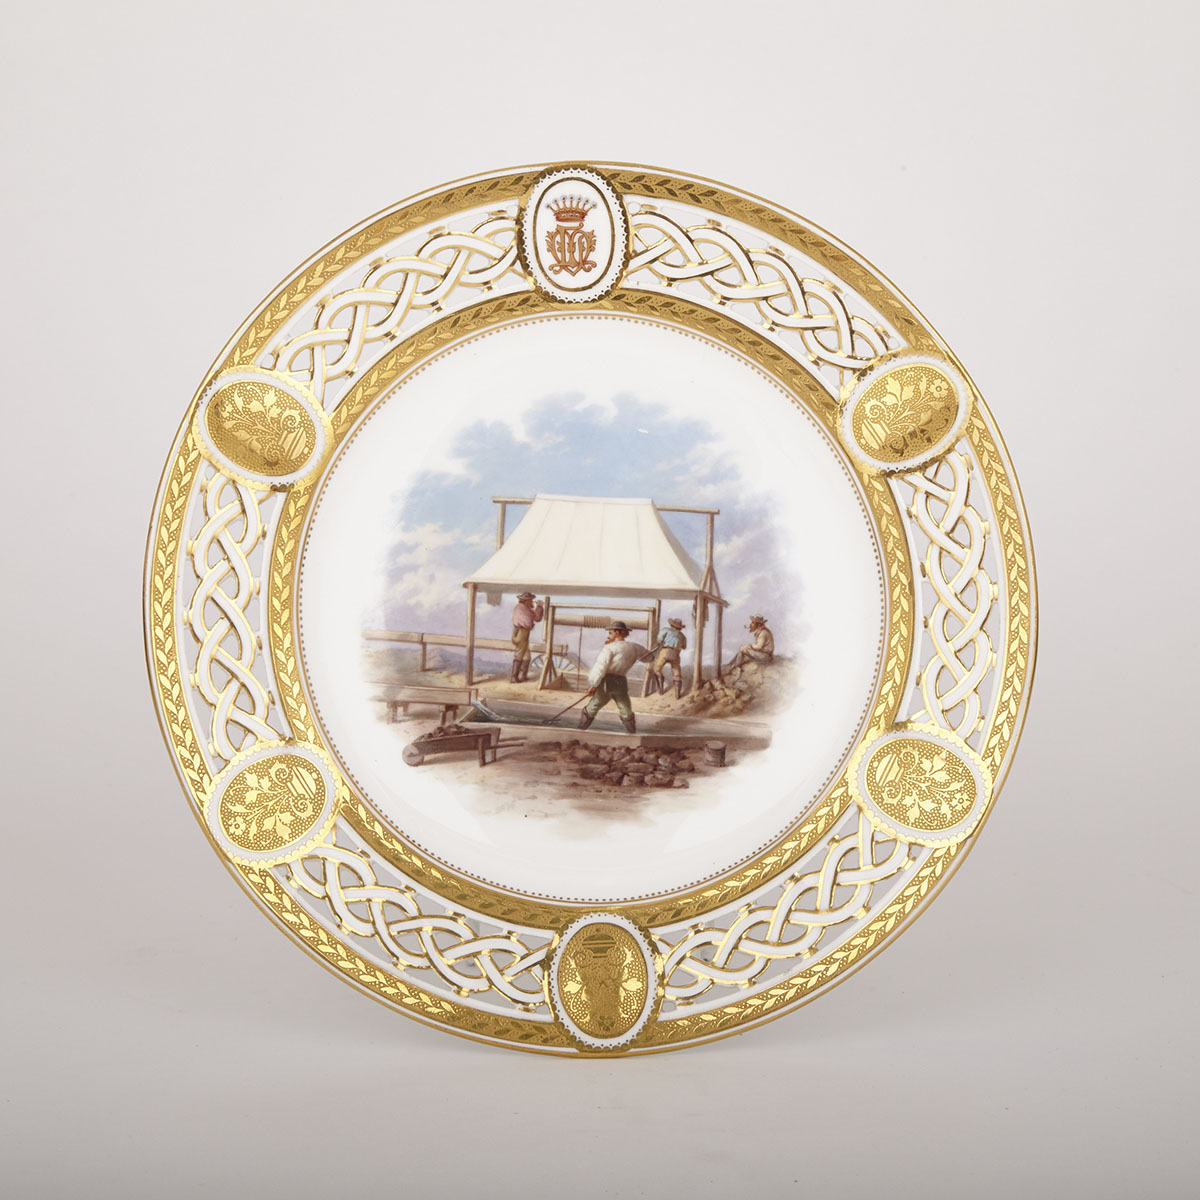 Minton Plate from the Lord Milton Service, c.1867